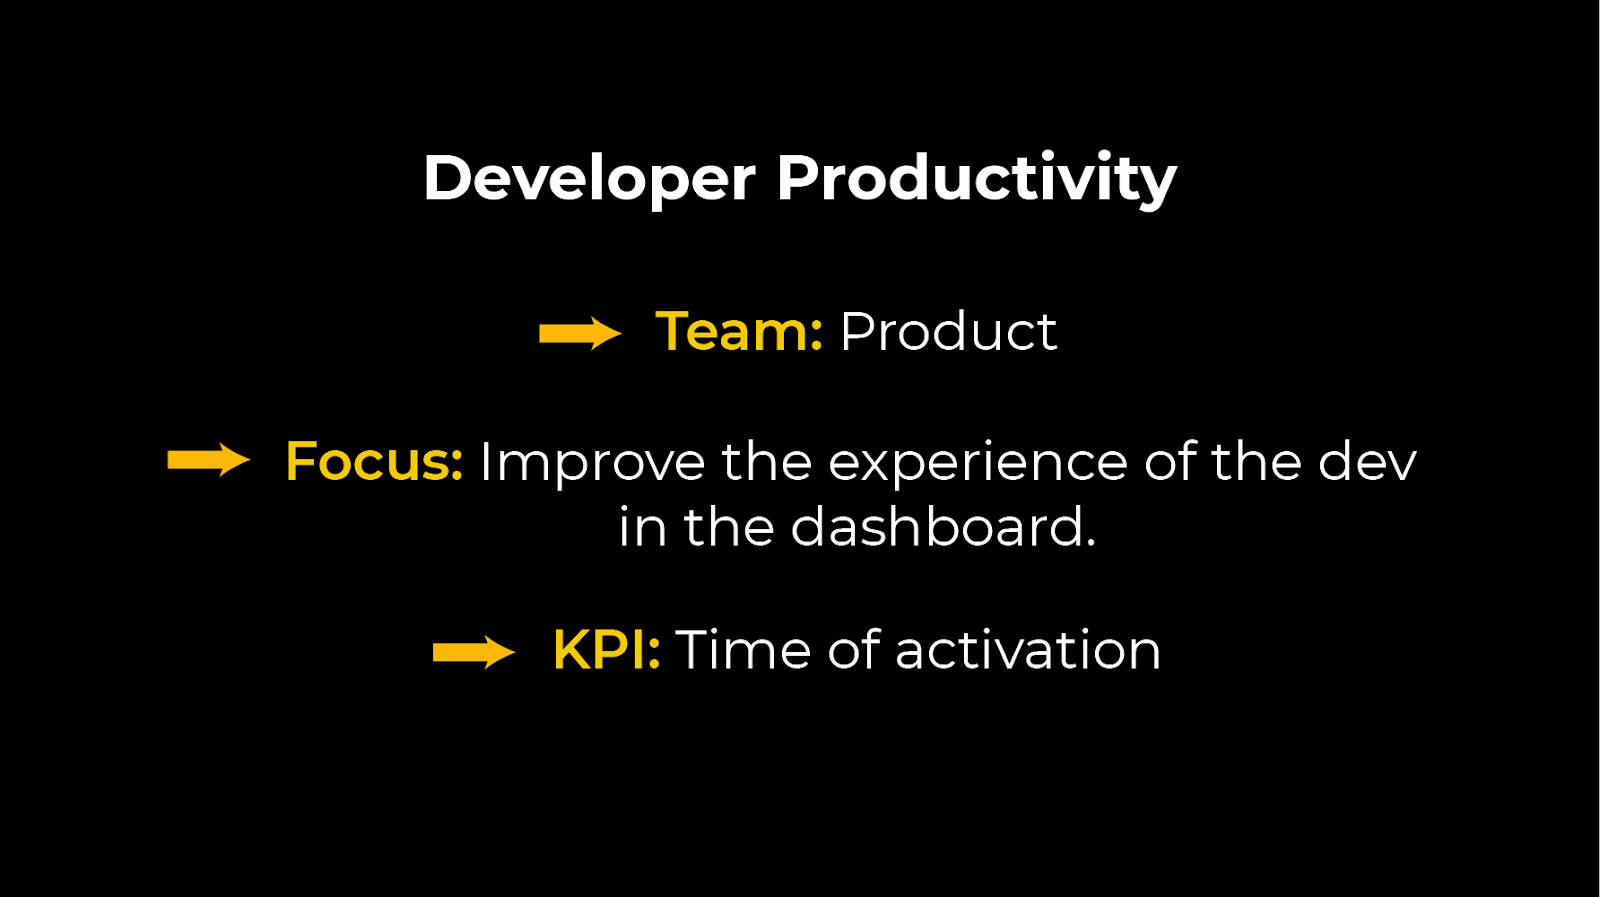 Developer Productivity for activation rate saas